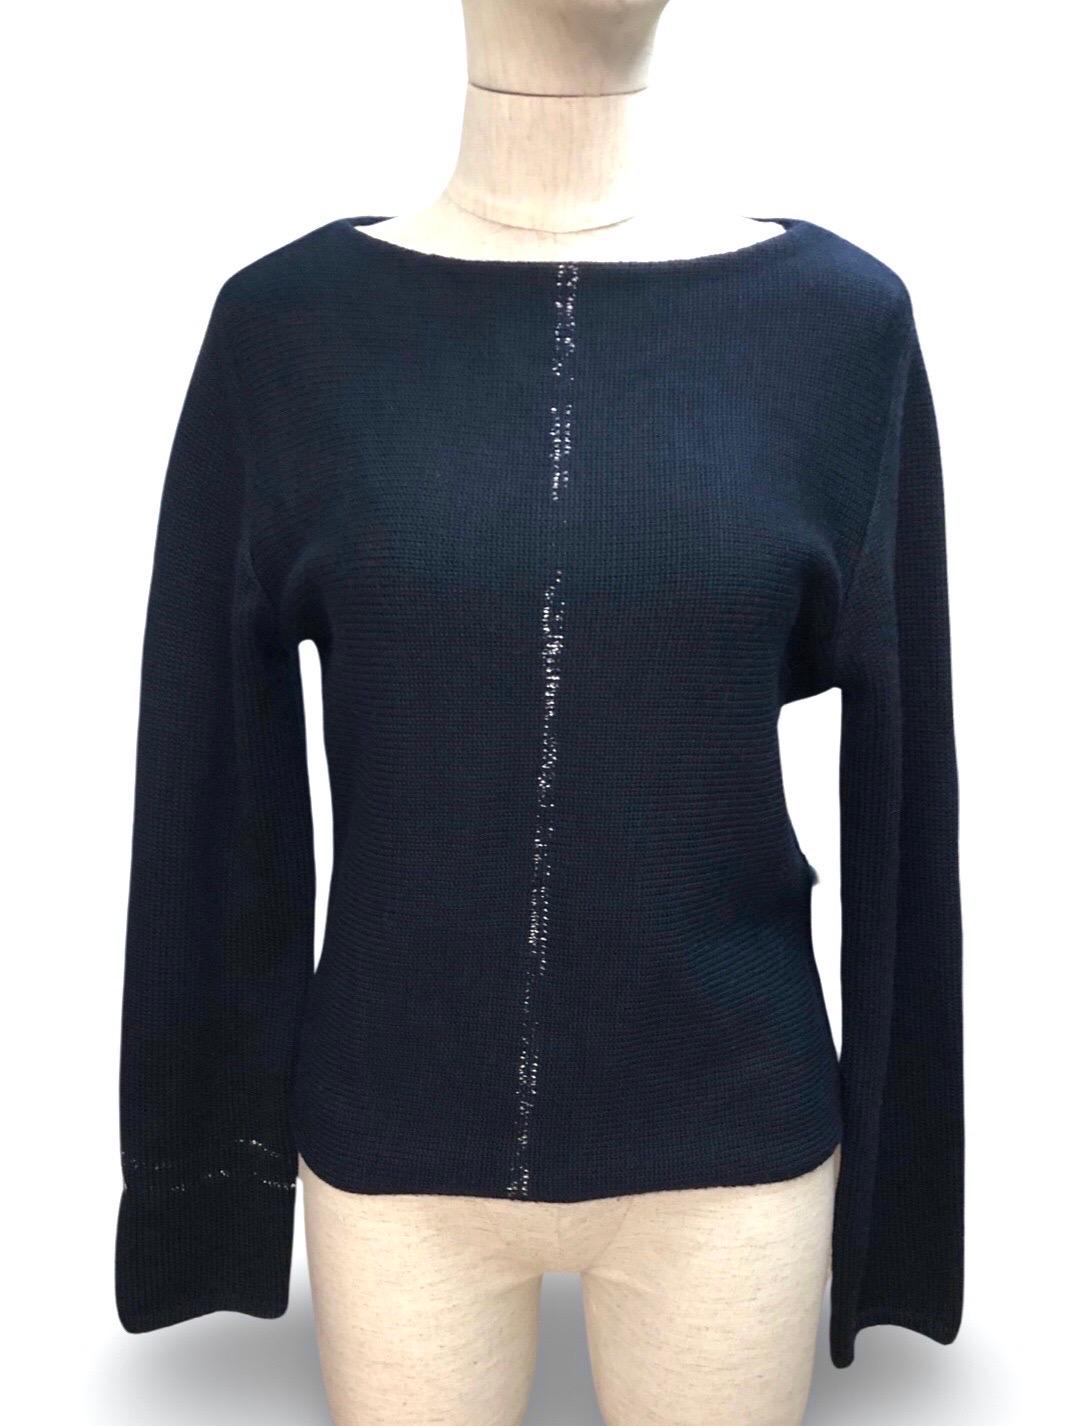 - Chanel dark navy heavy wool knitted pullover sweater from fall 1999 collection. 

- Silver lining in front and right sleeve. 

- Size 40. 

- 98% Wool, 2% Nylon. 


